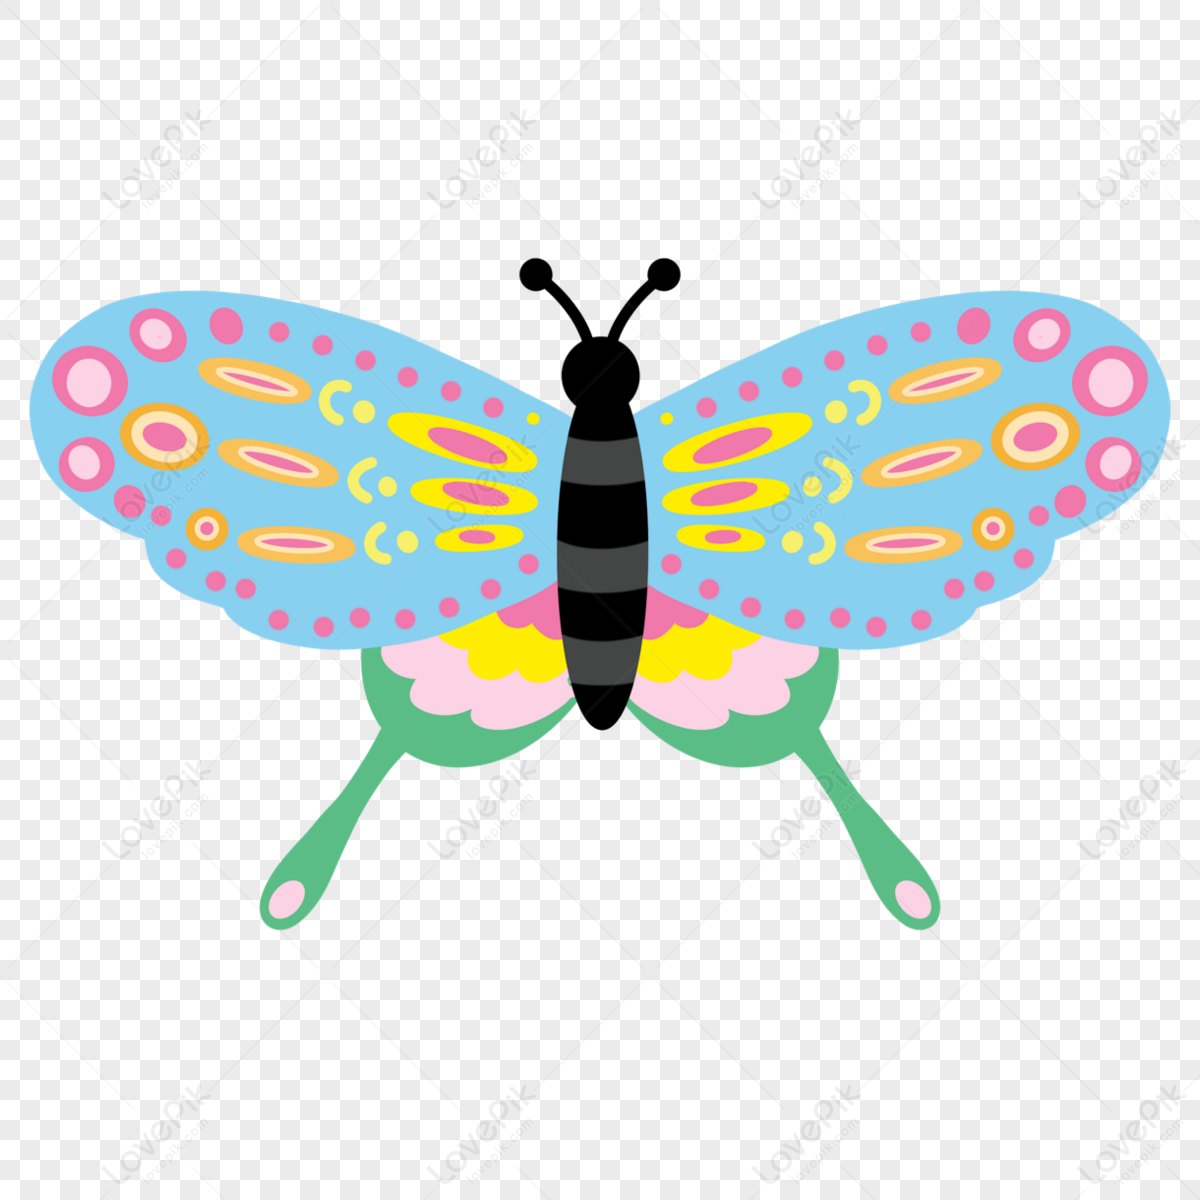 Fly butterfly png images with transparent background free download on